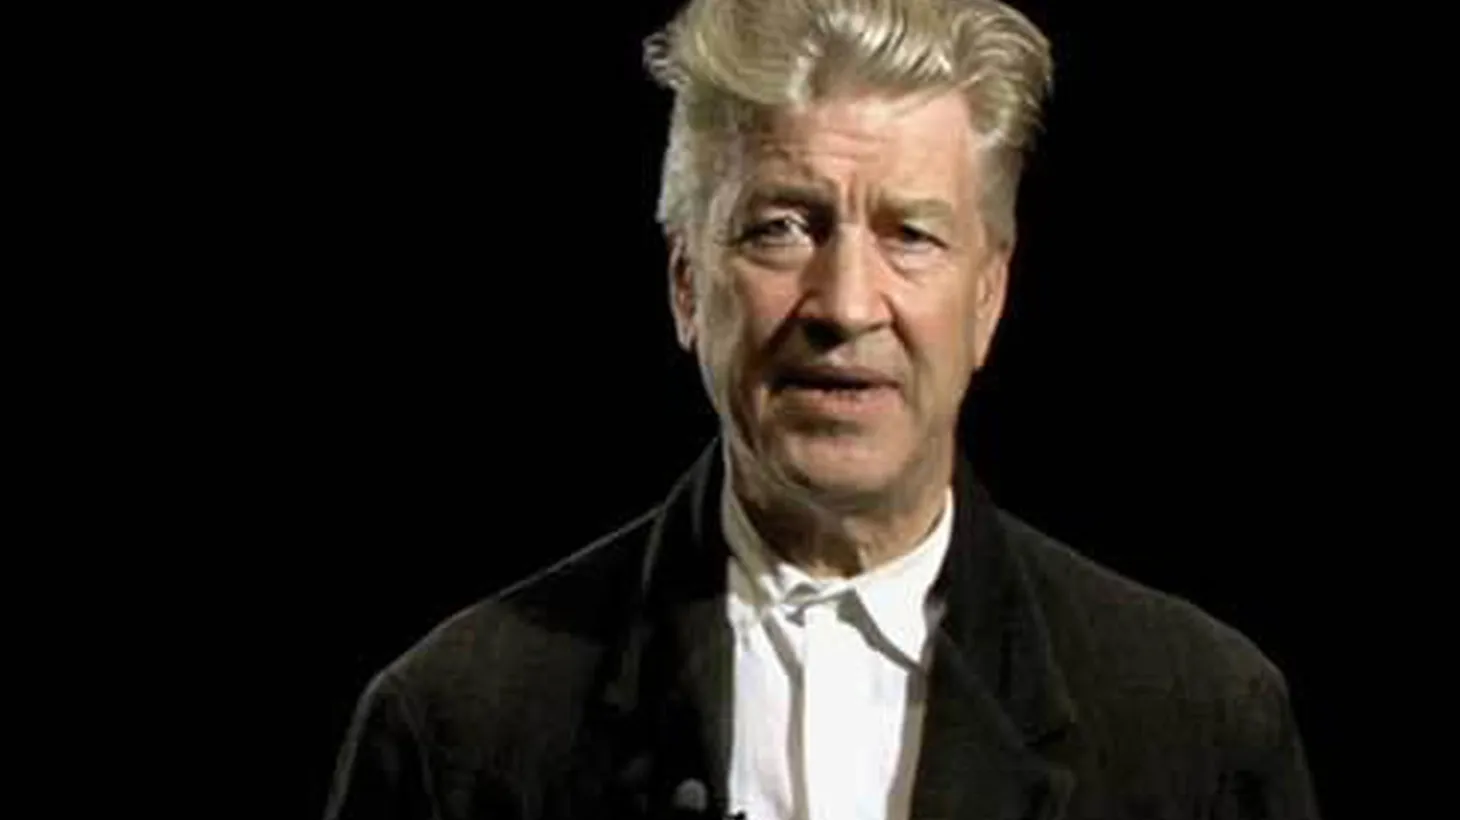 An exciting morning is in store when director turned musician David Lynch joins Morning Becomes Eclectic to talk about his new endeavor in the 10 o’clock hour followed by a full session with electronic giants Underworld at 11:15am.